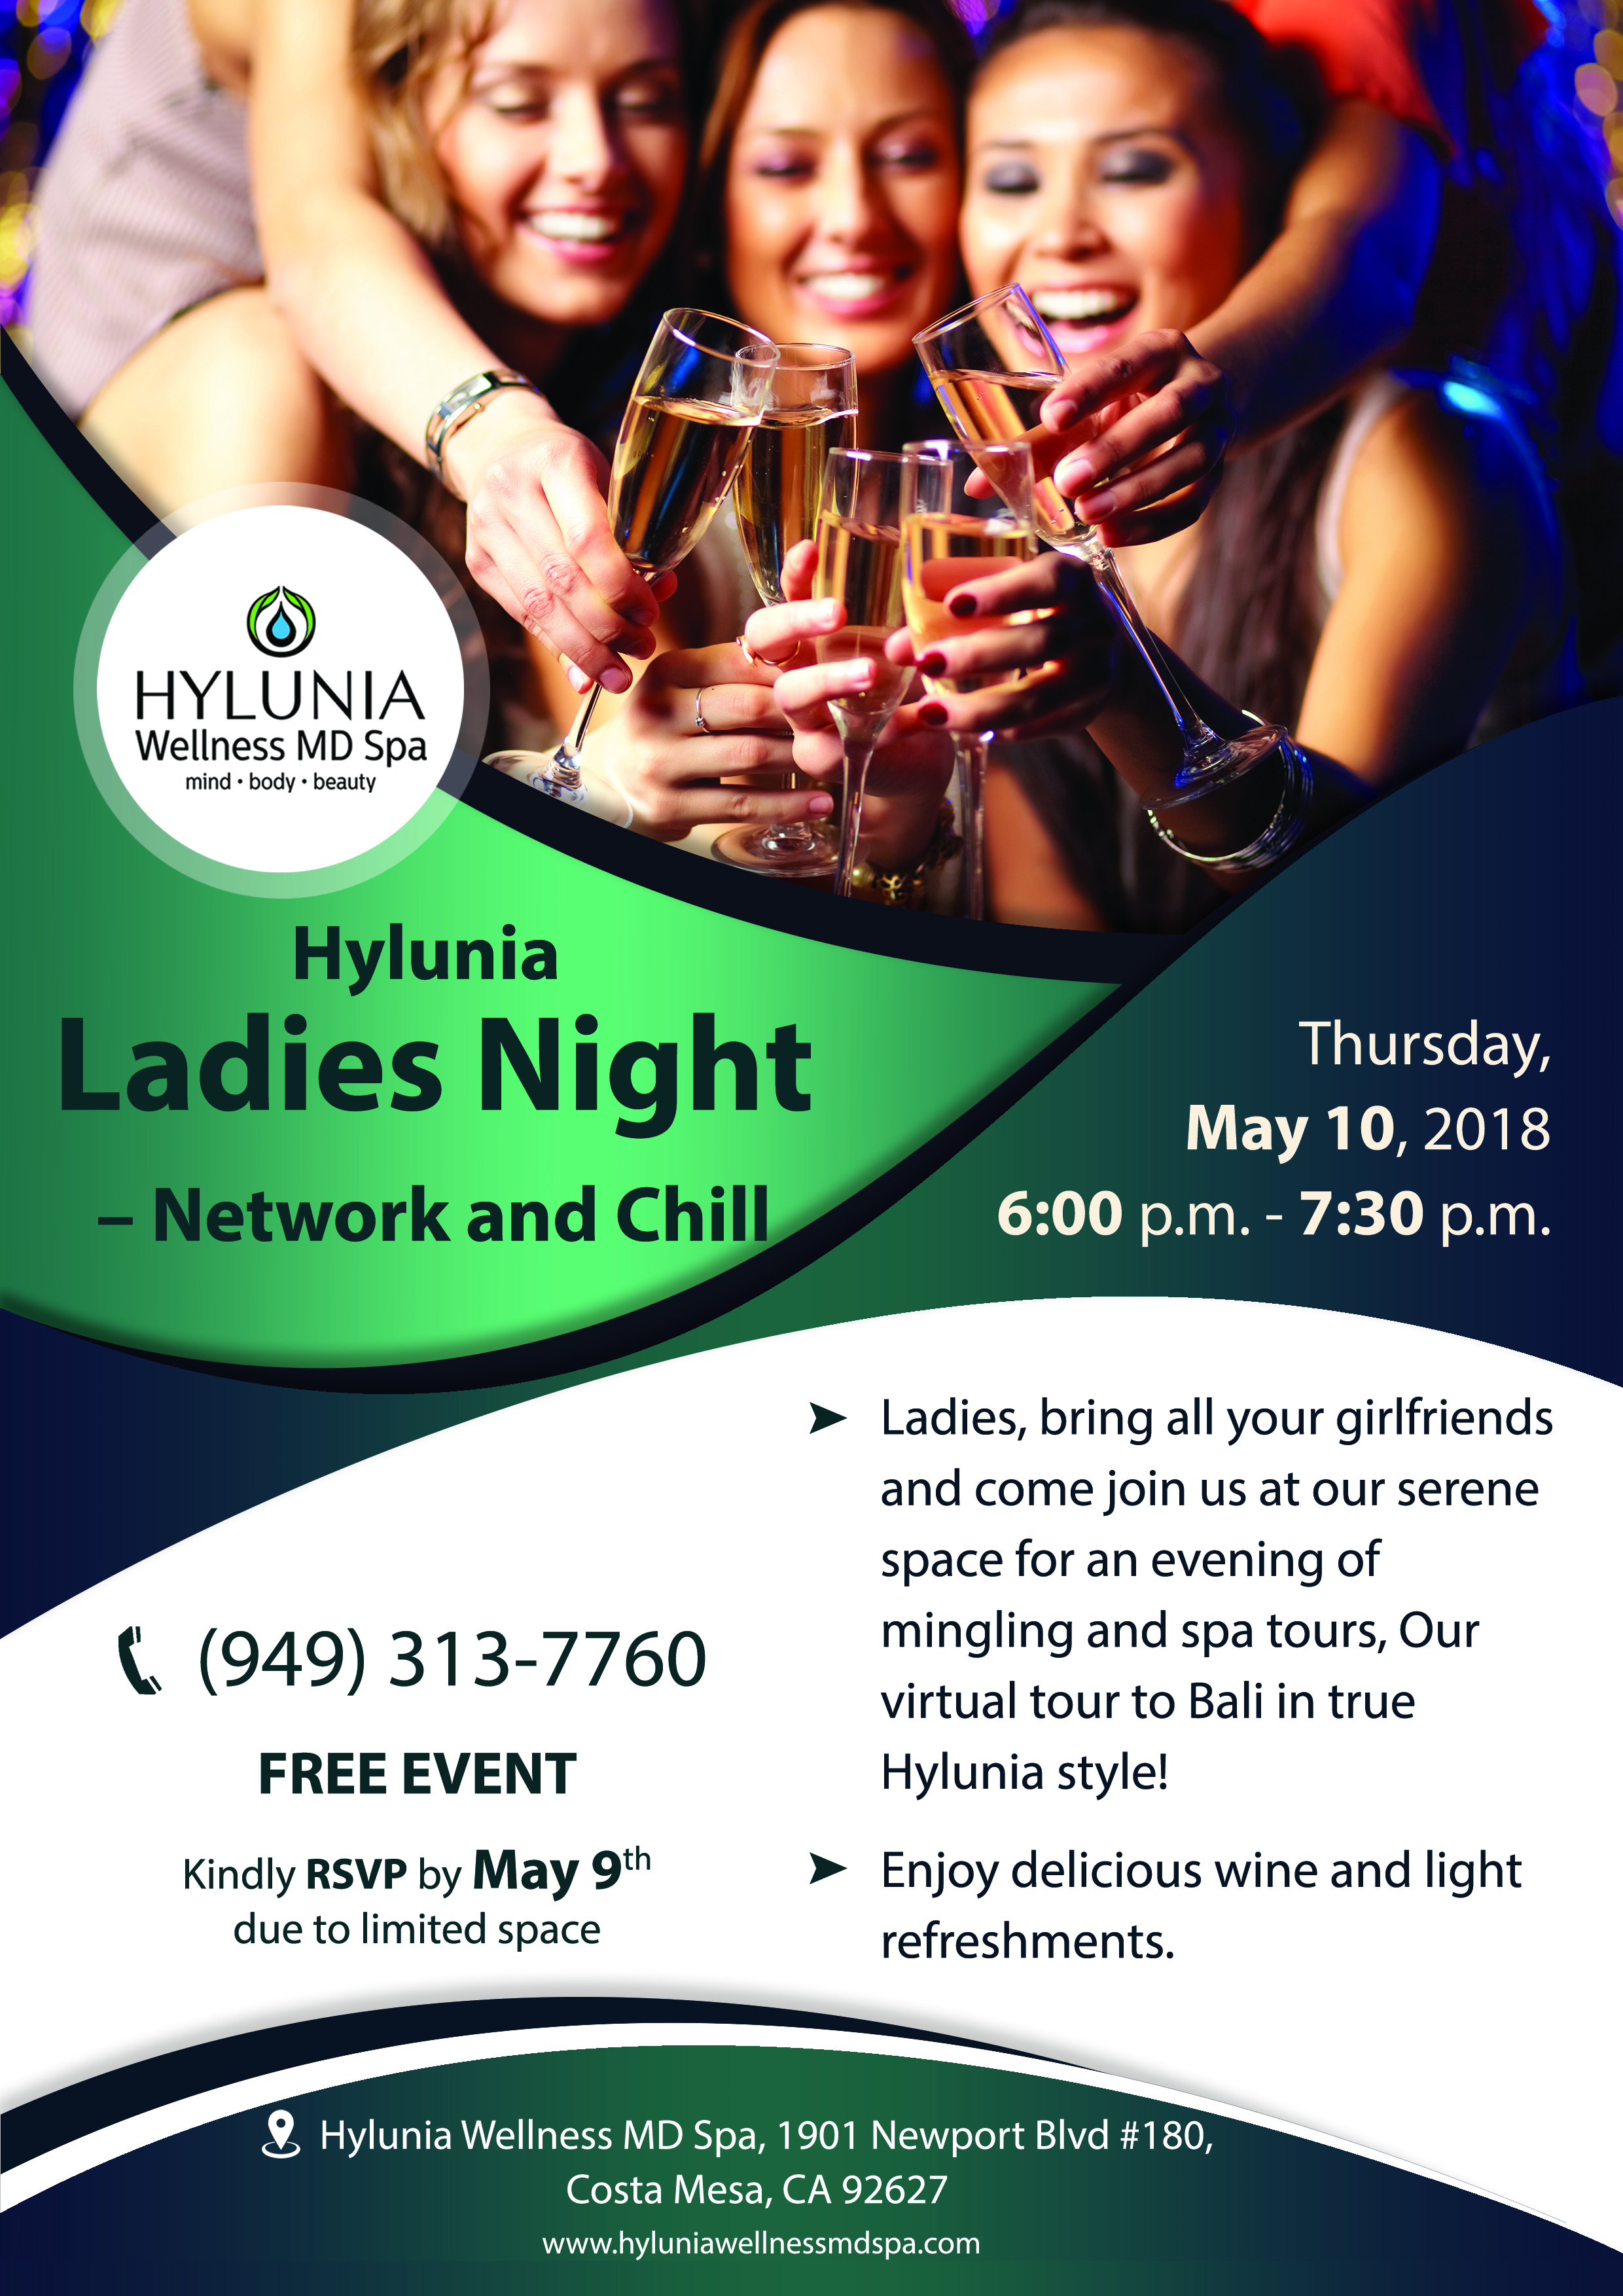 Hylunia Ladies night – Network and Chill